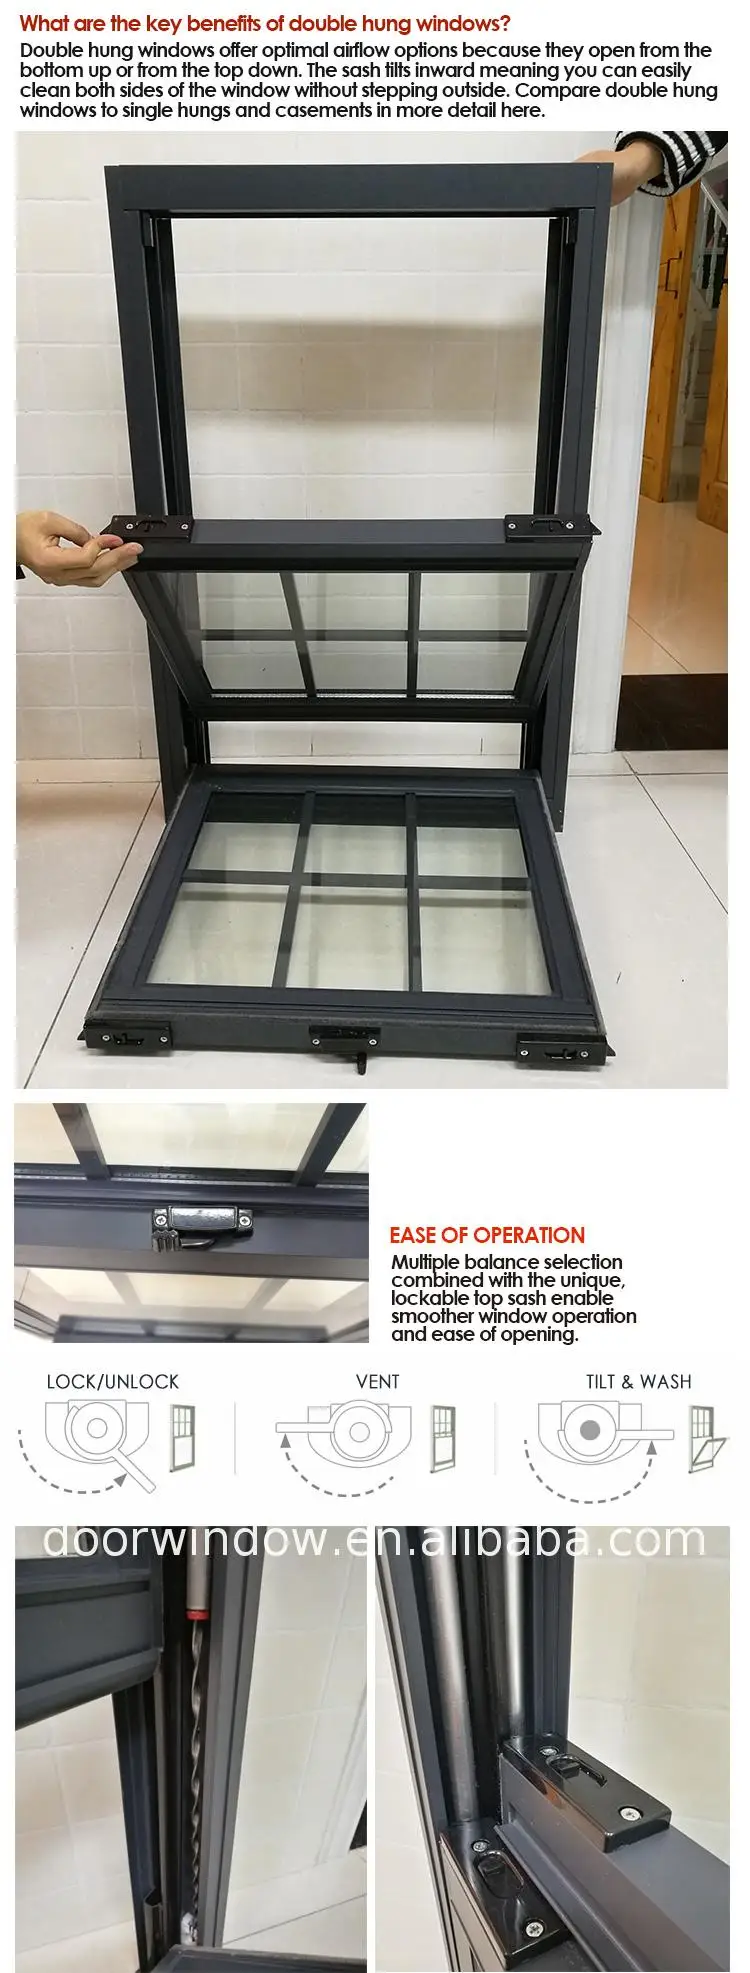 Manufactory direct double hung window with transom sizes security bar